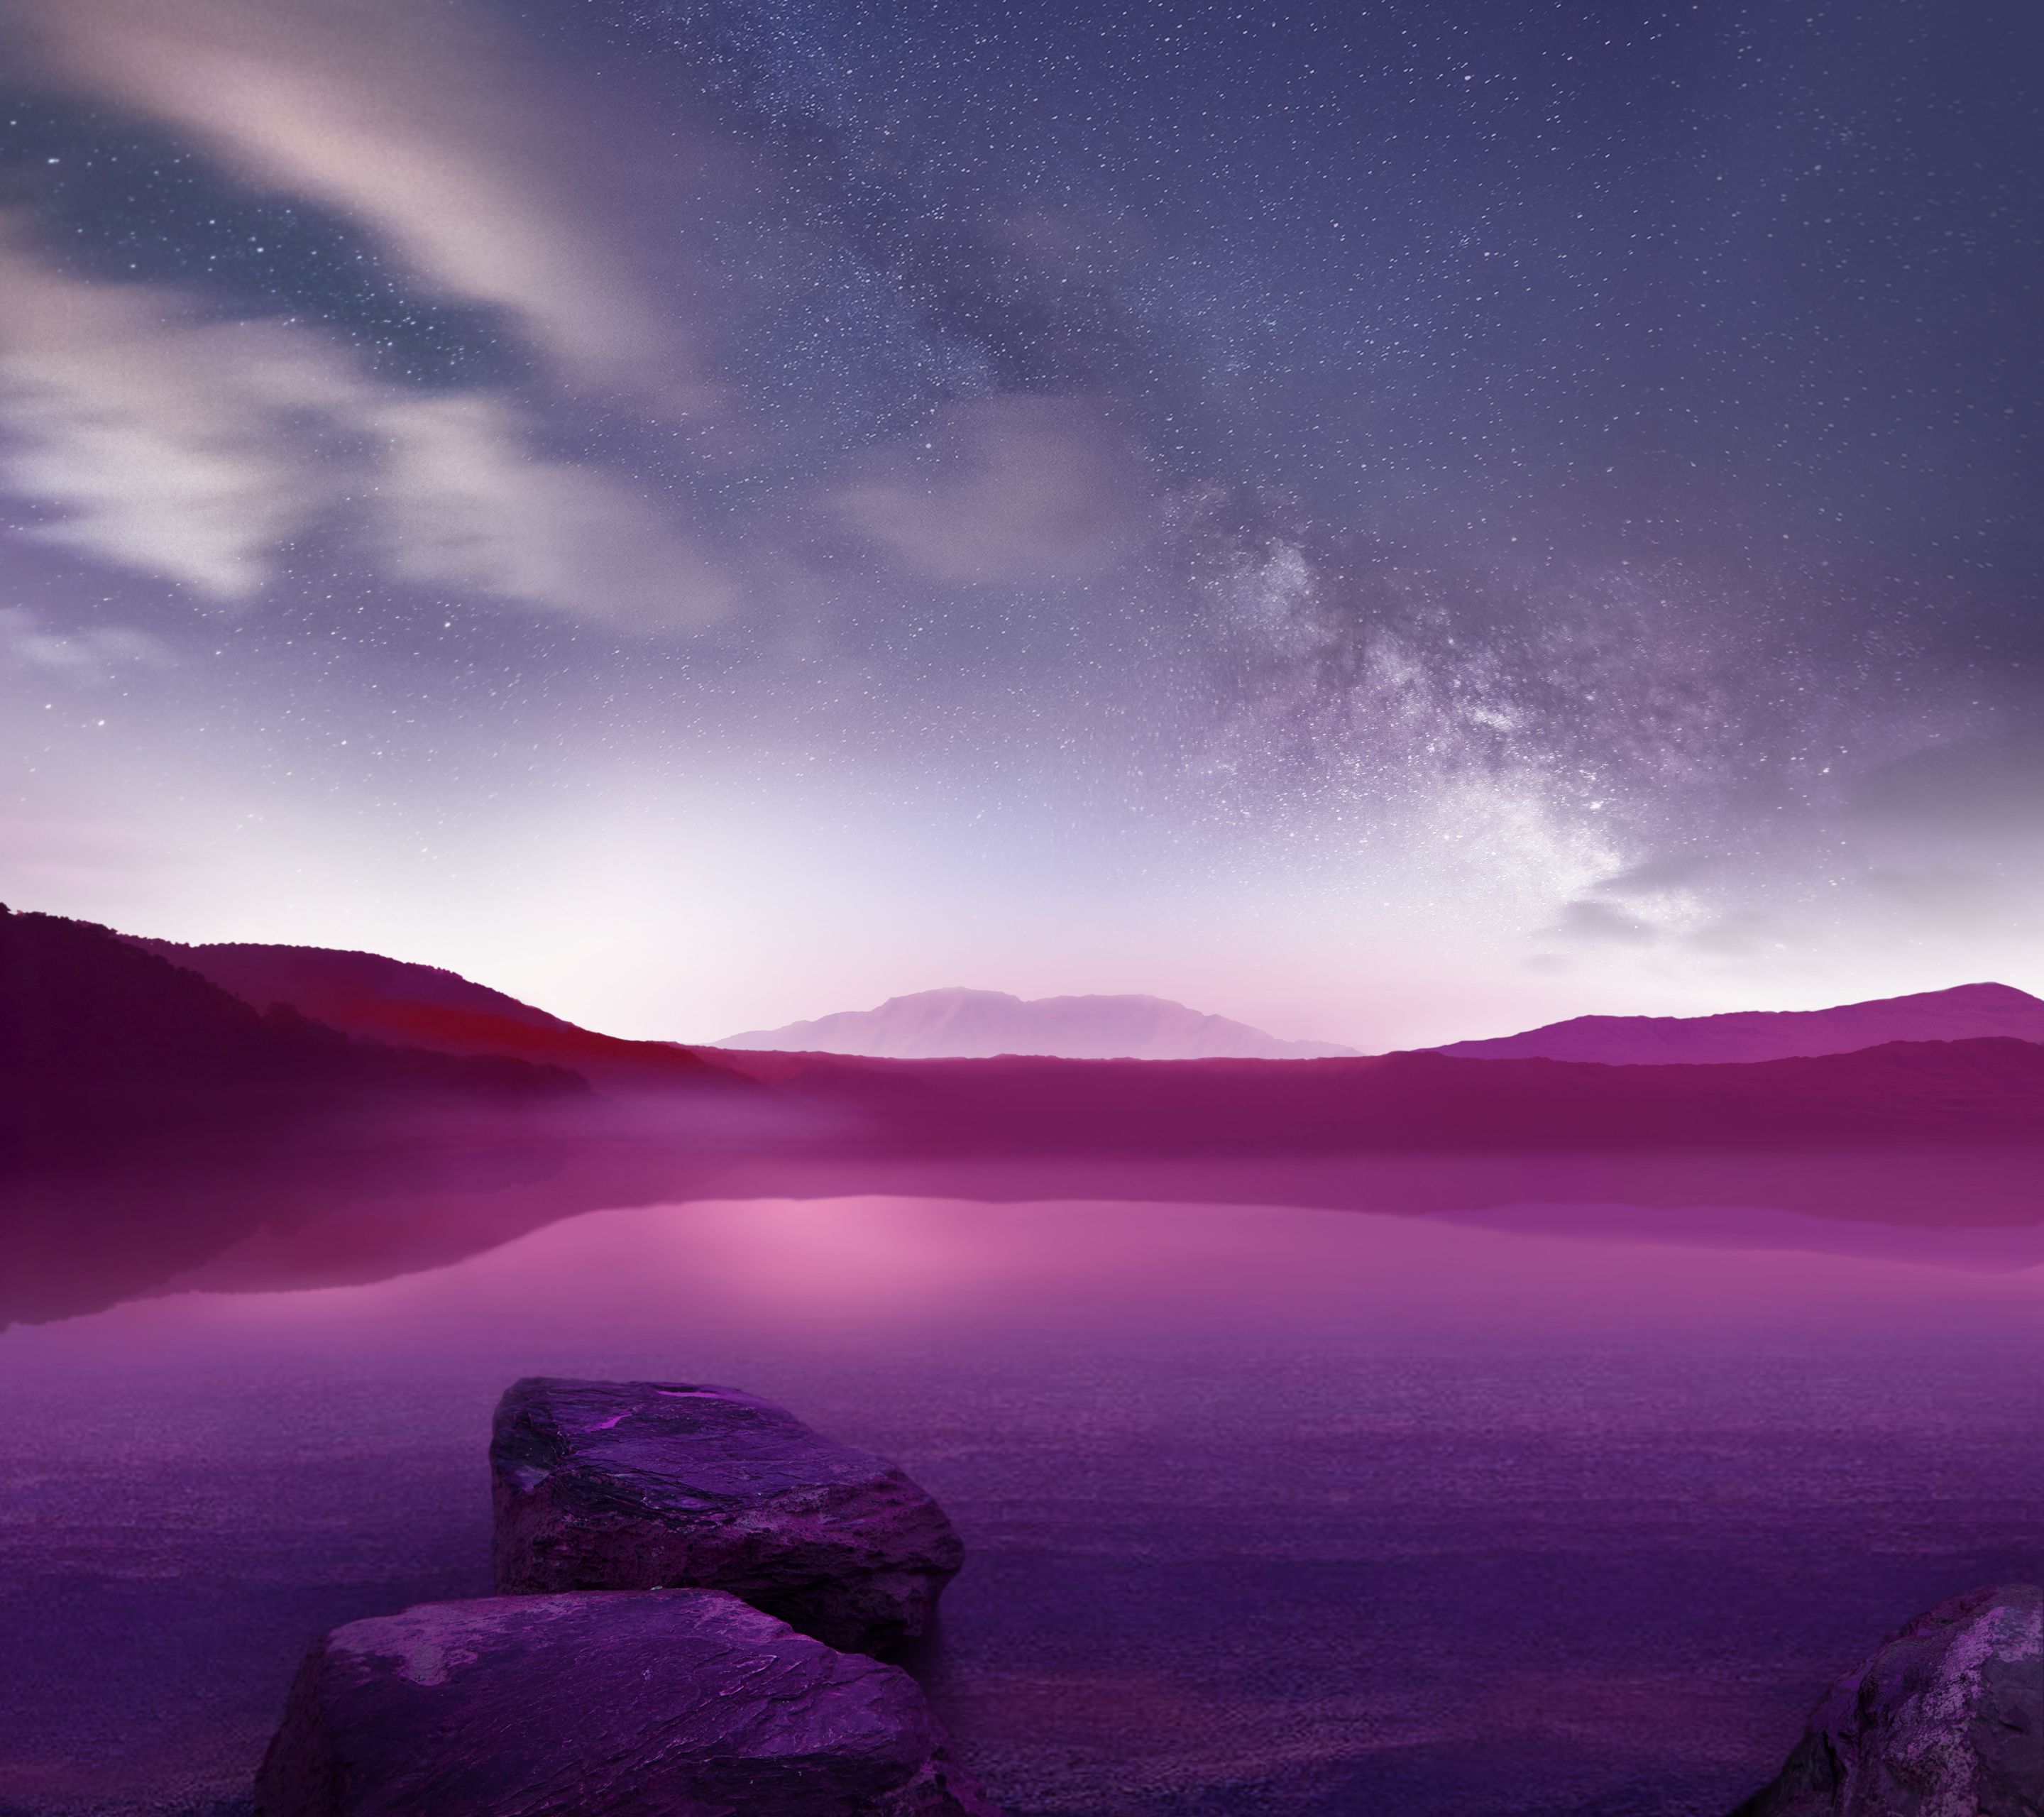 Download all ten official LG V10 wallpapers here